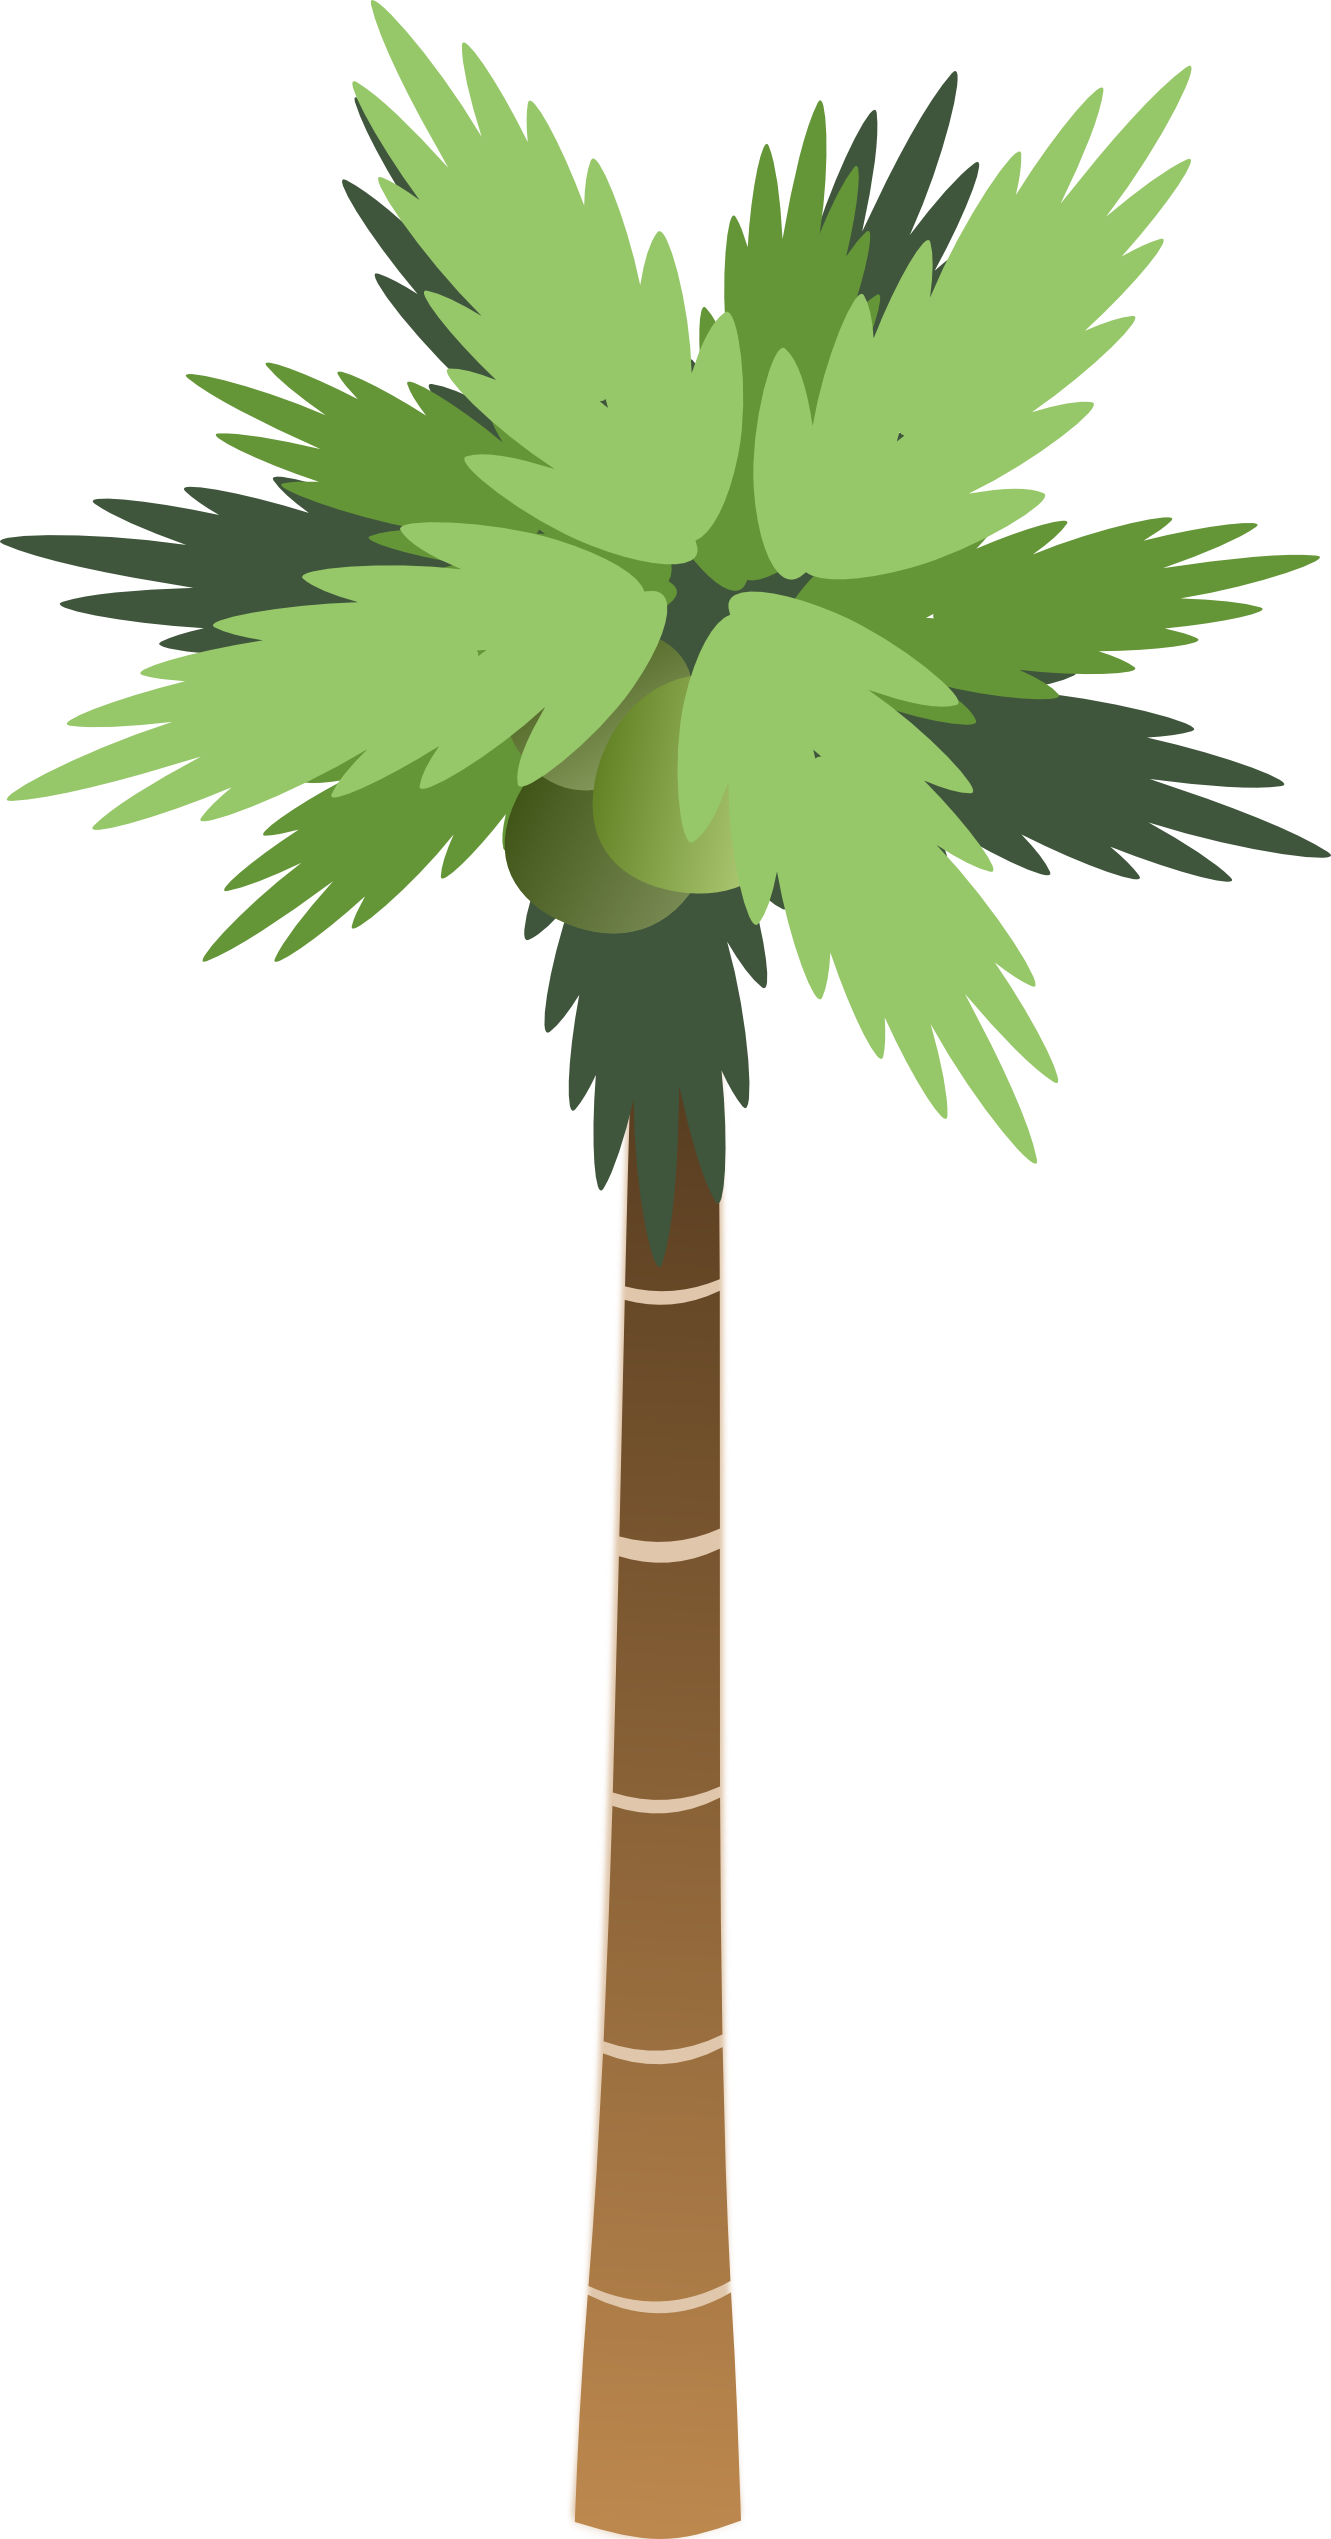 10 Christmas Palm Tree Clip Art   Free Cliparts That You Can Download